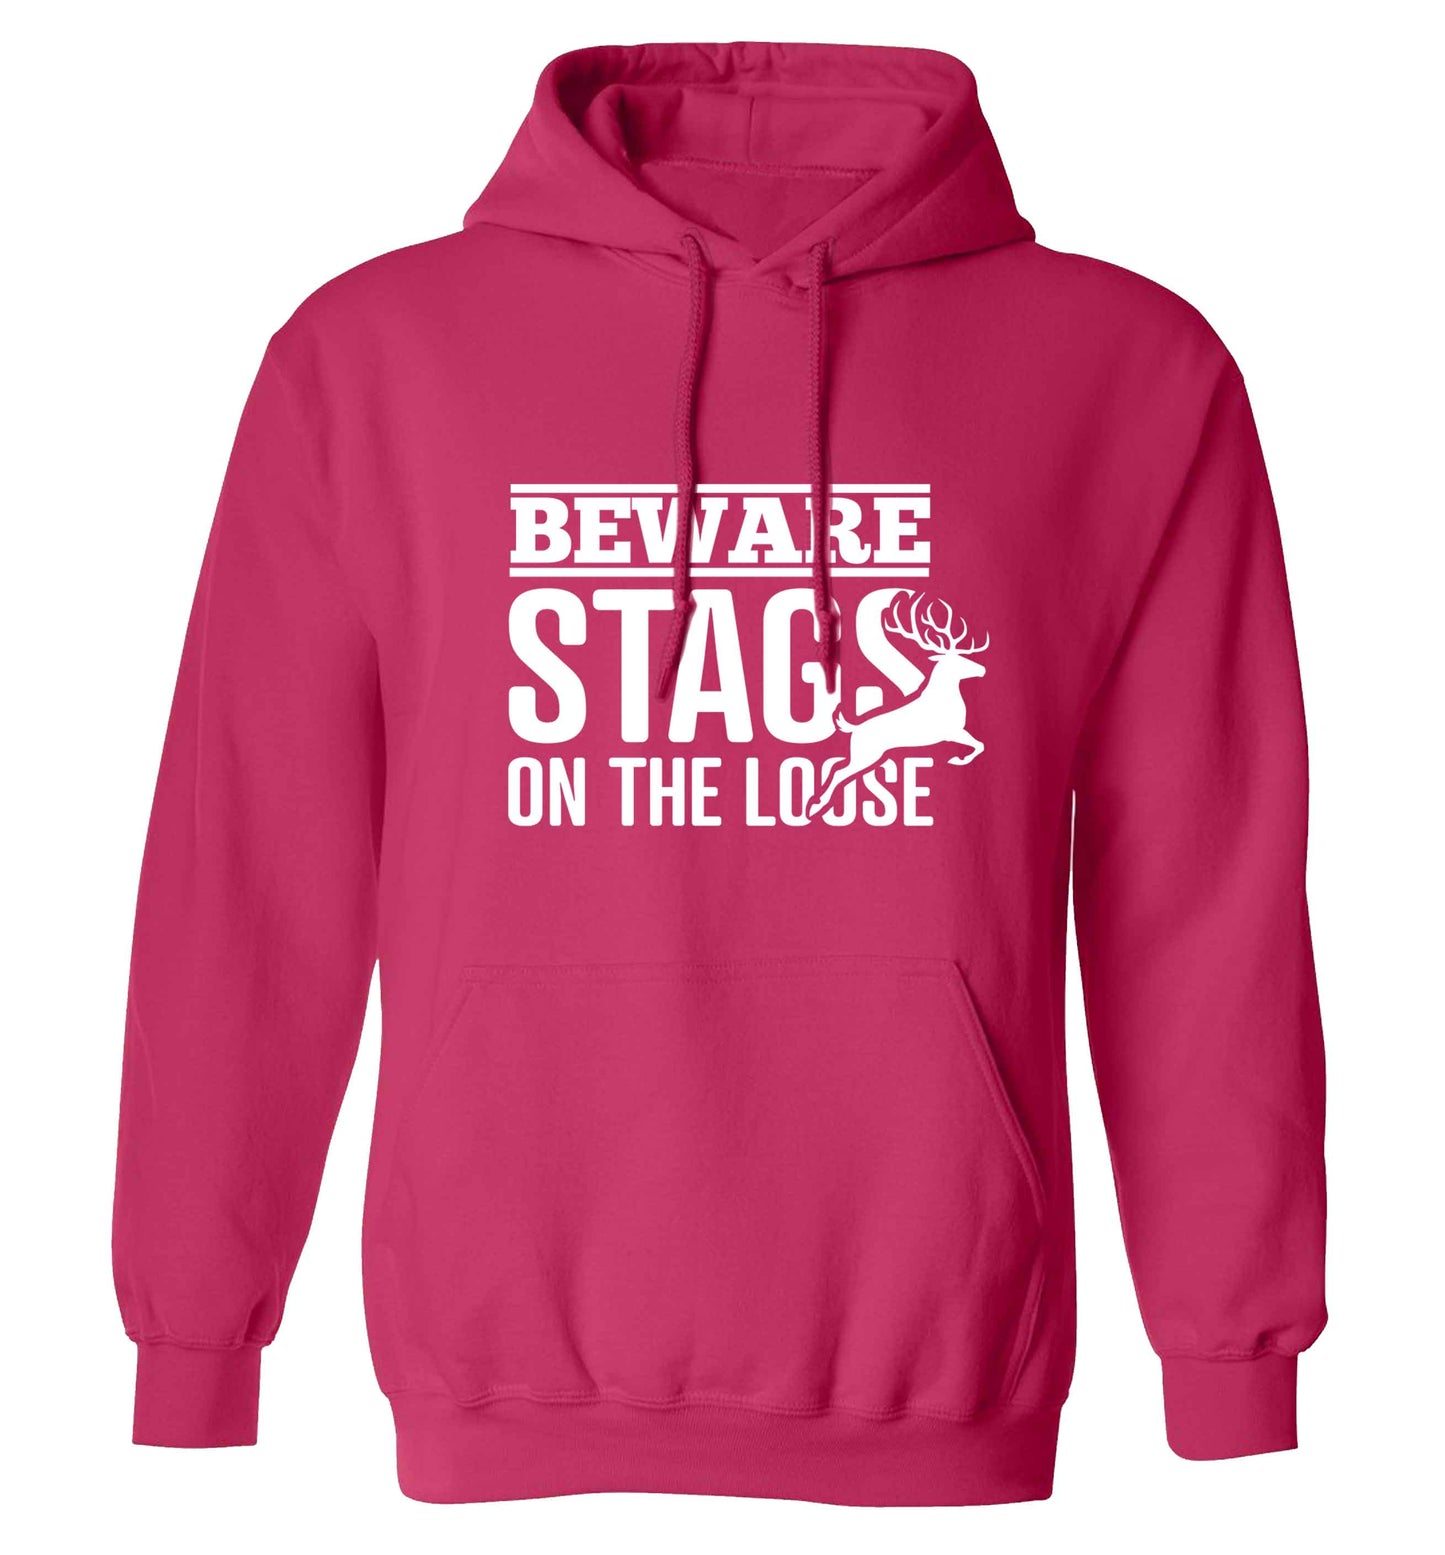 Beware stags on the loose adults unisex pink hoodie 2XL